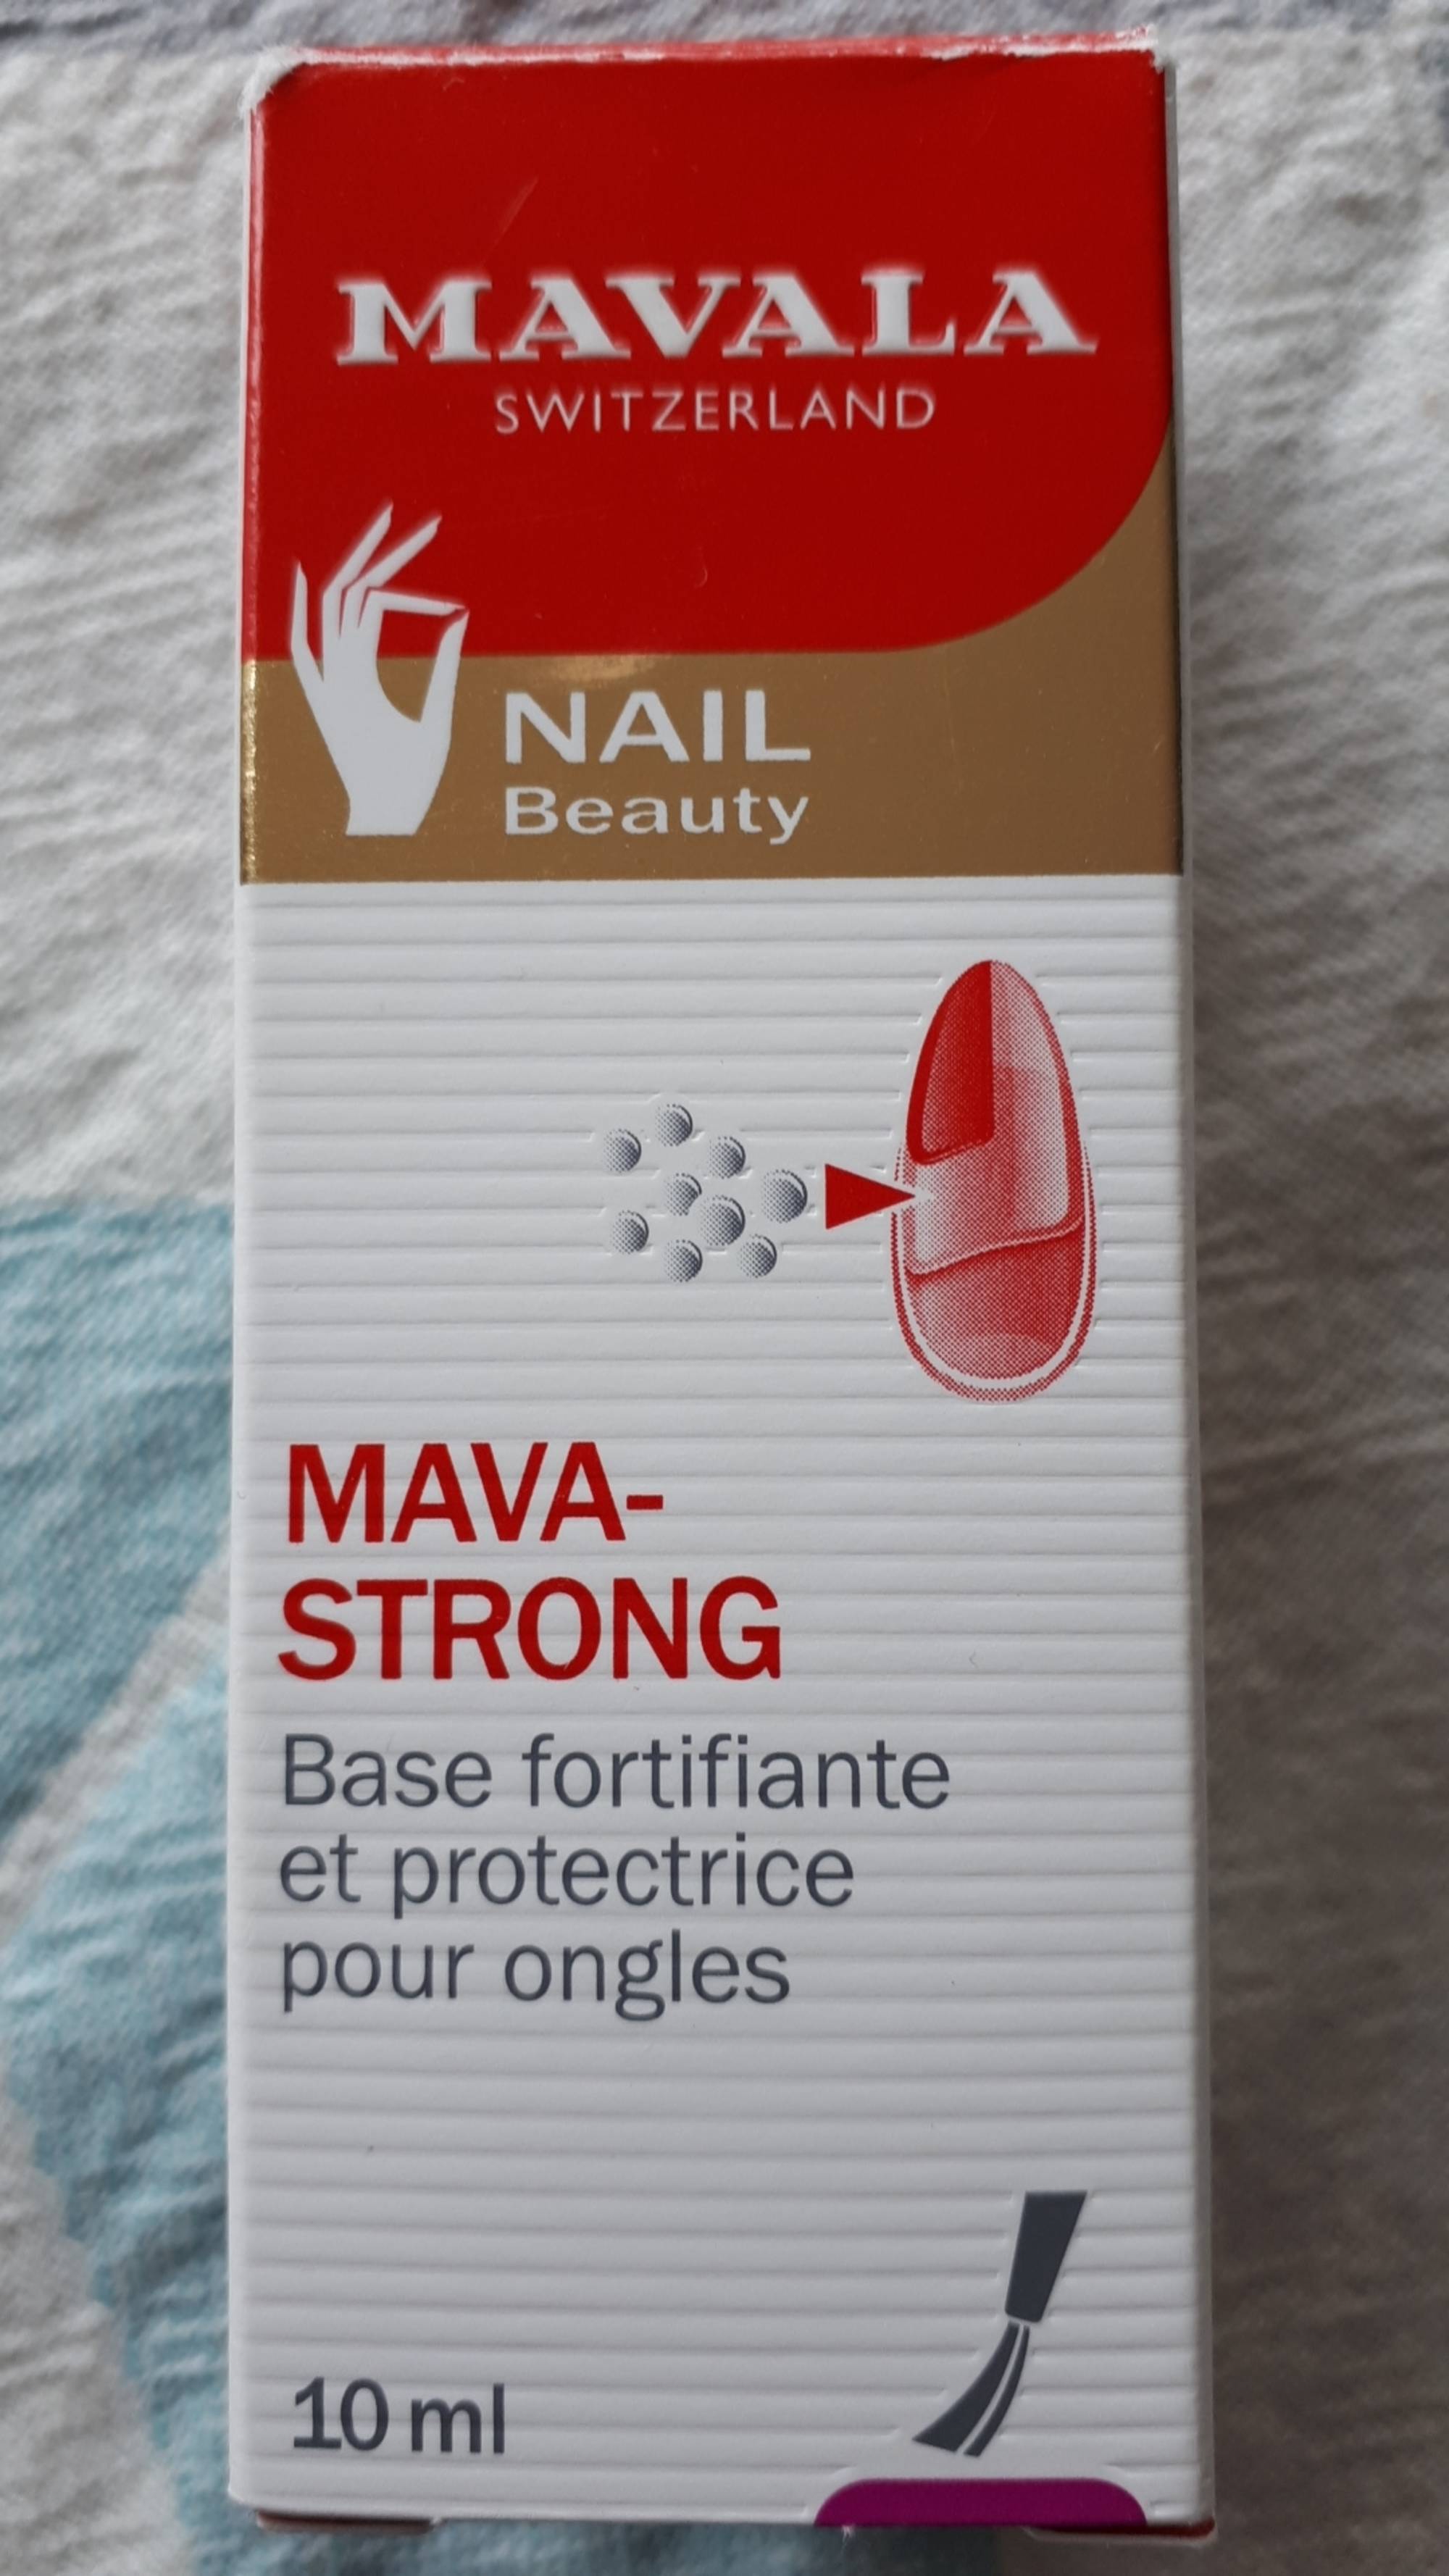 MAVALA - Mava-strong - Base fortifiante et protectrice pour ongles 